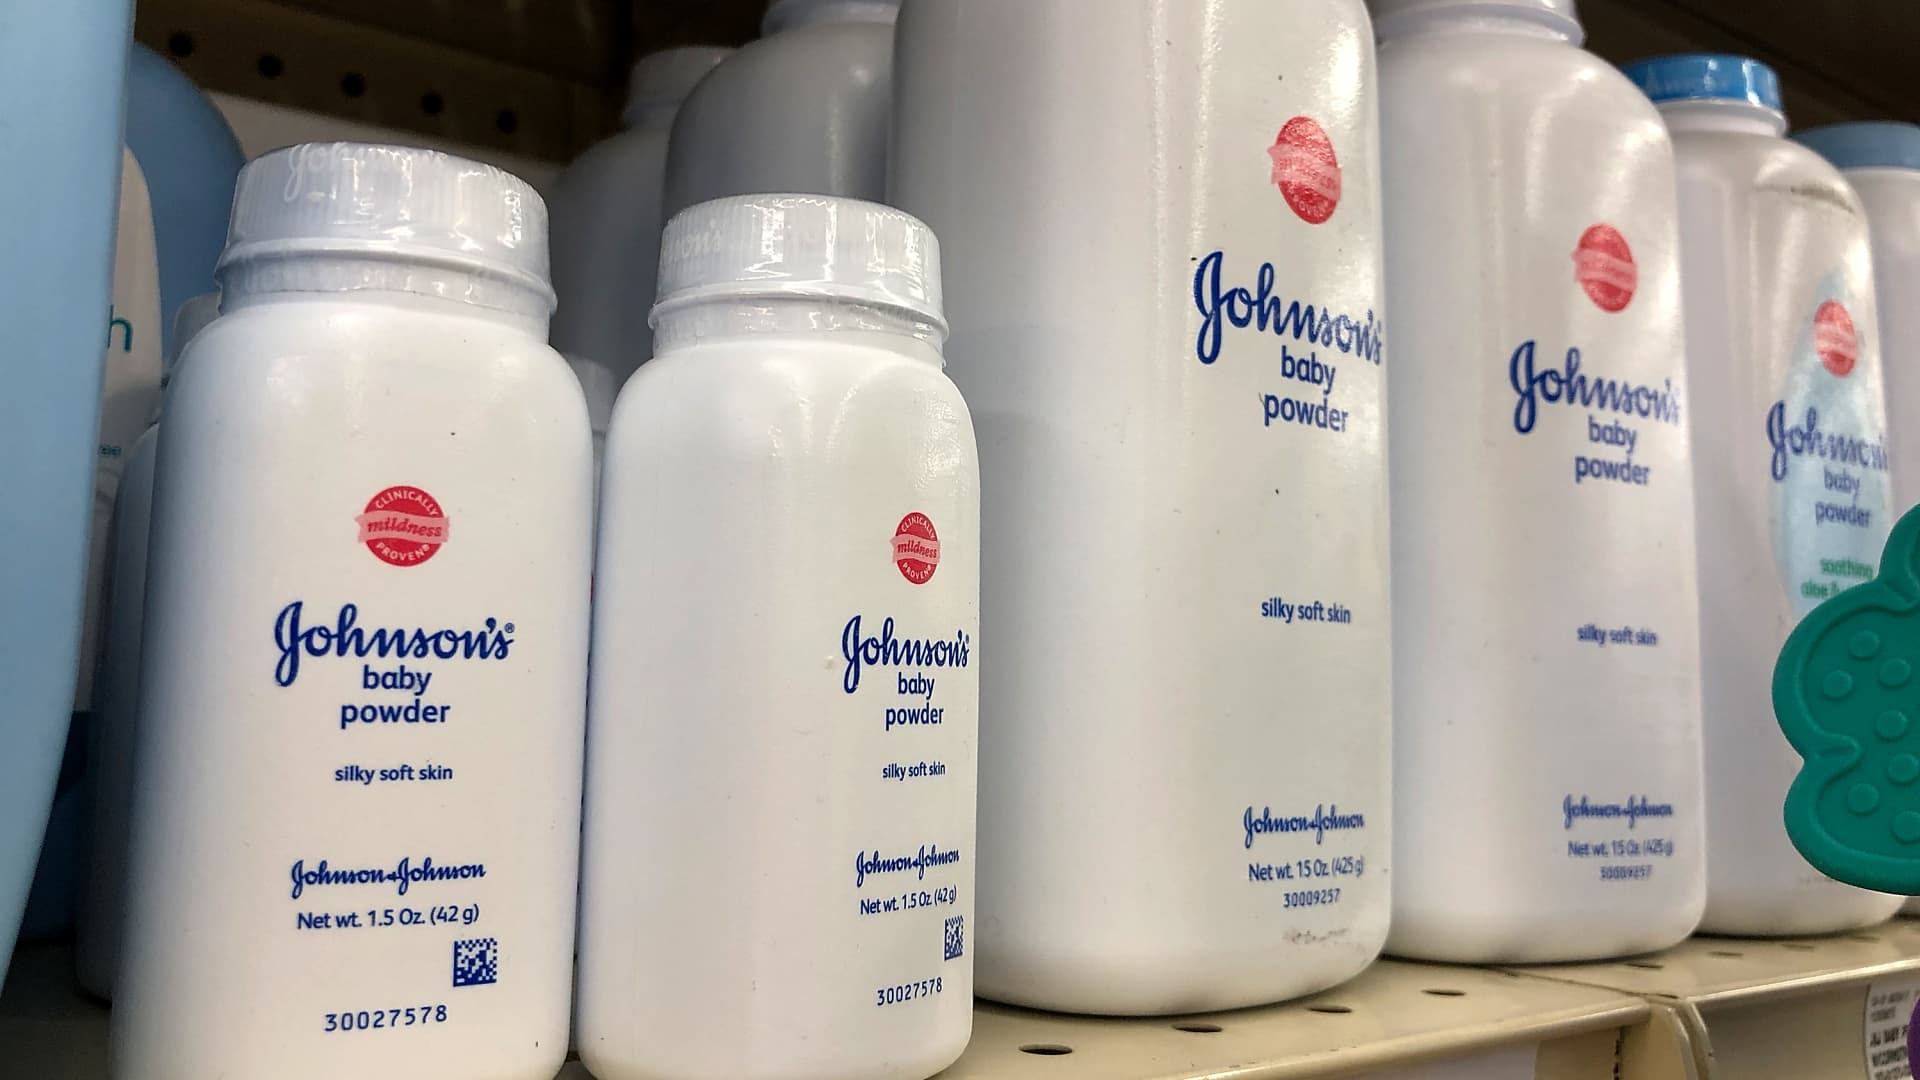 J&J will pay $8.9 billion to settle claims cosmetic talc products caused cancer